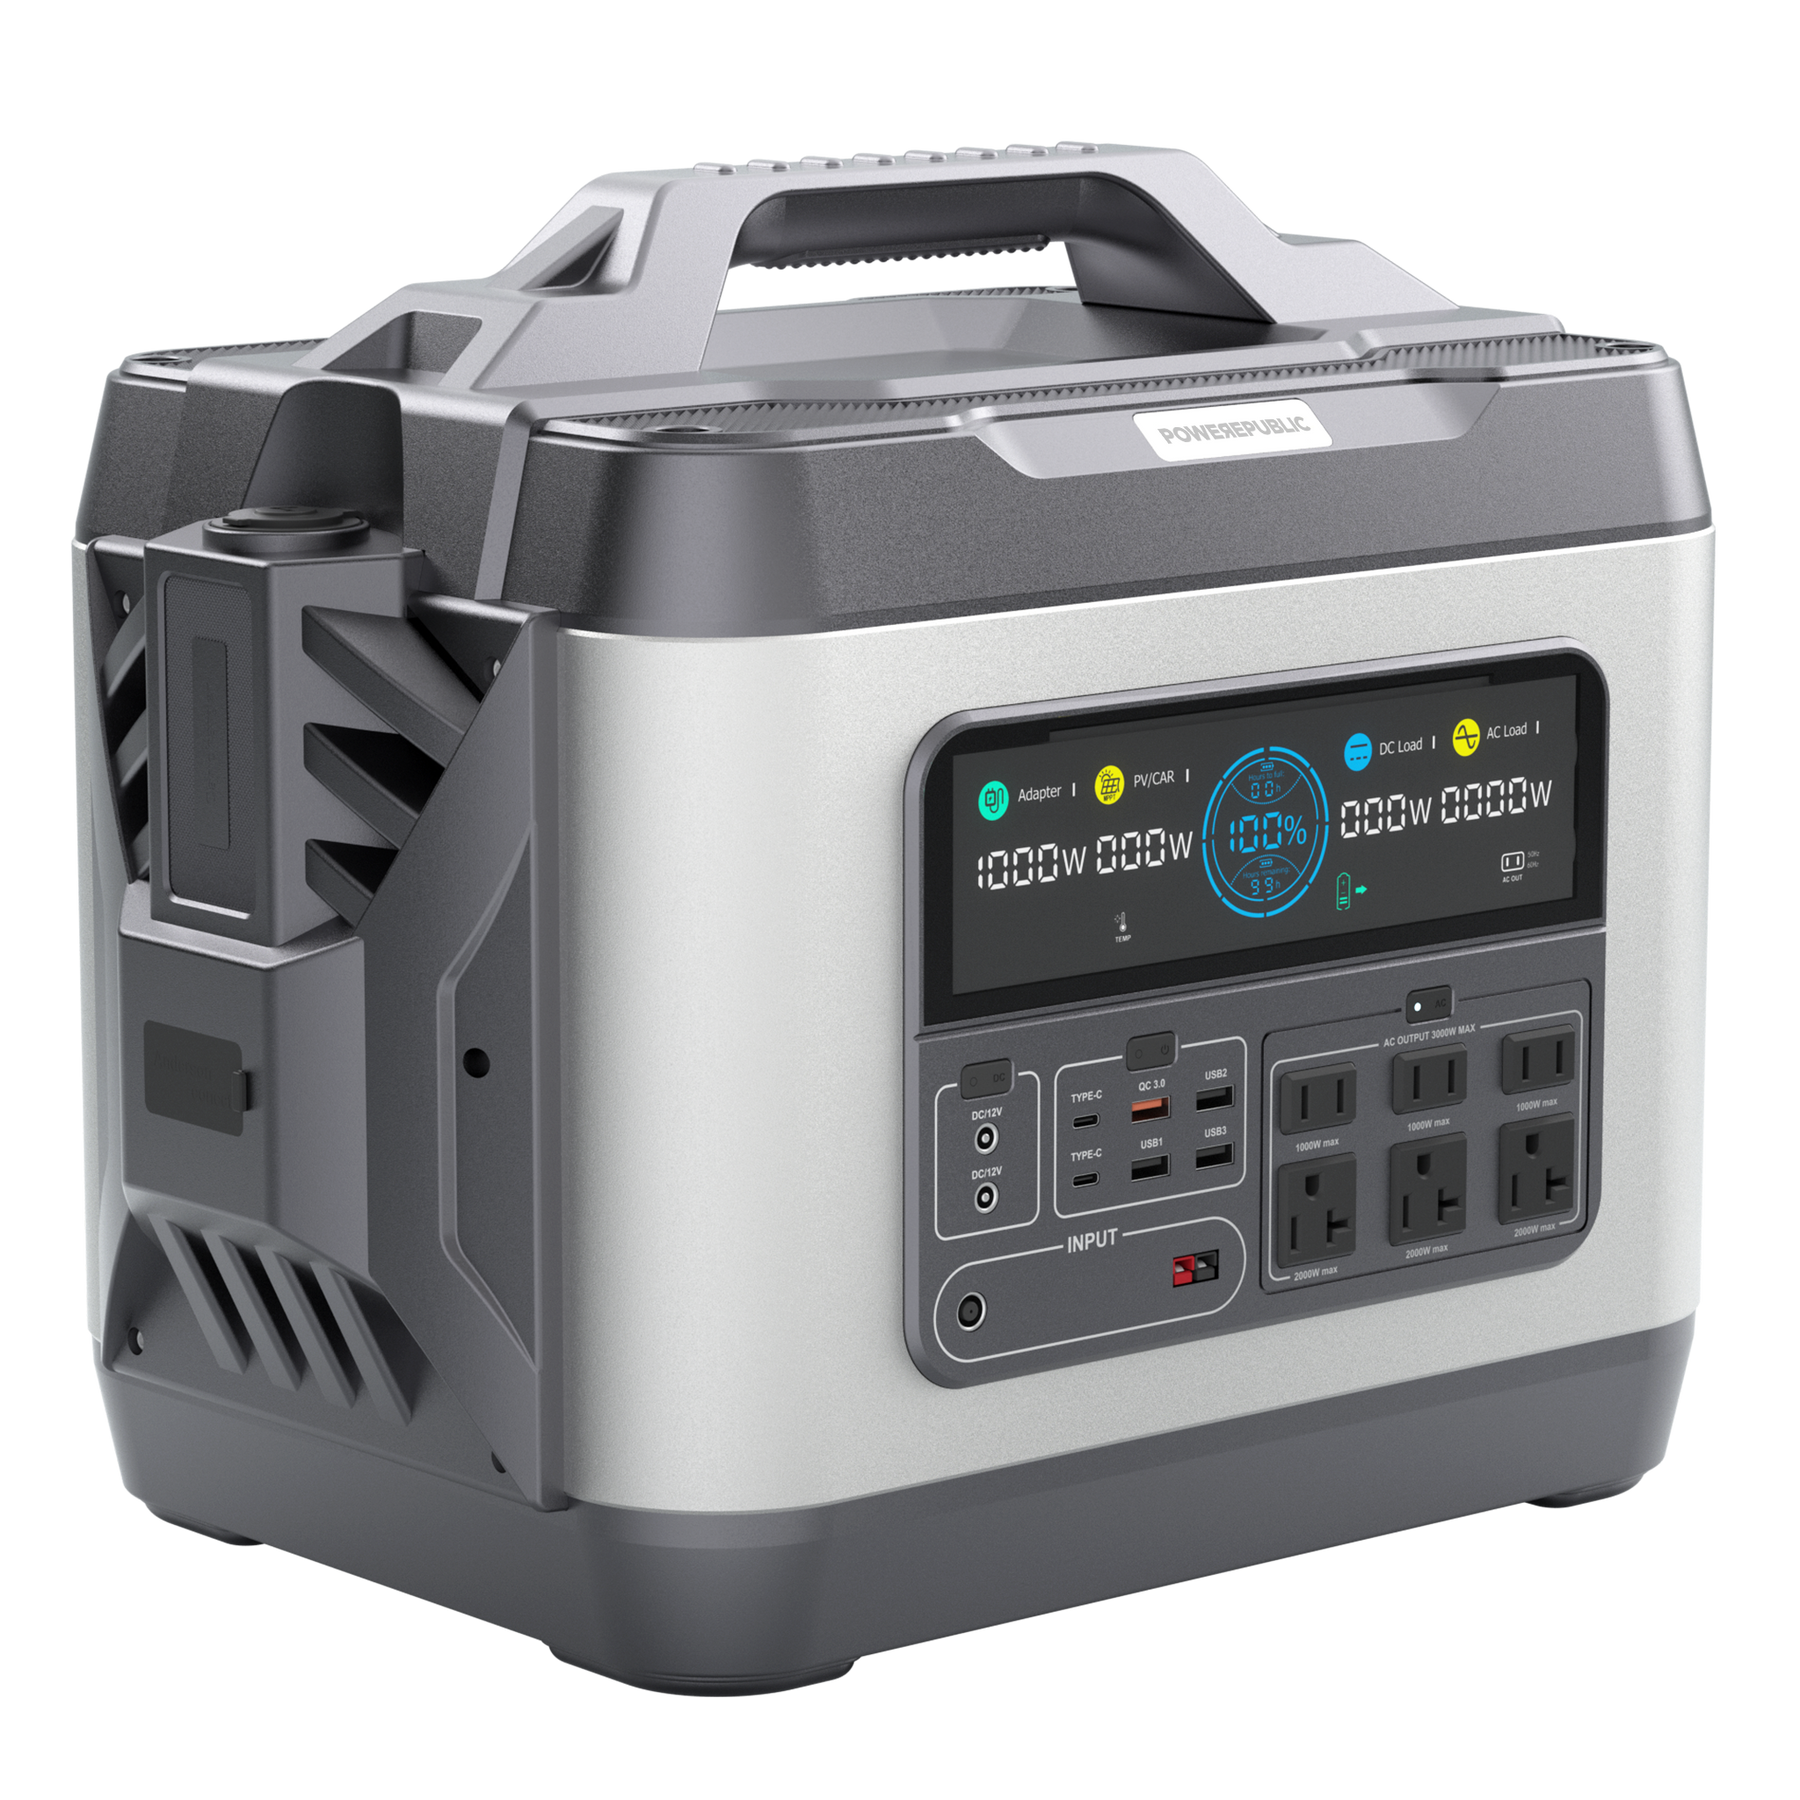 POWEREPUBLIC T3000 portable power station, 3000W 3200Wh, metallic gray aluminum-alloy body with aircraft wing design, a handle, an LCD screen, and input and output ports.